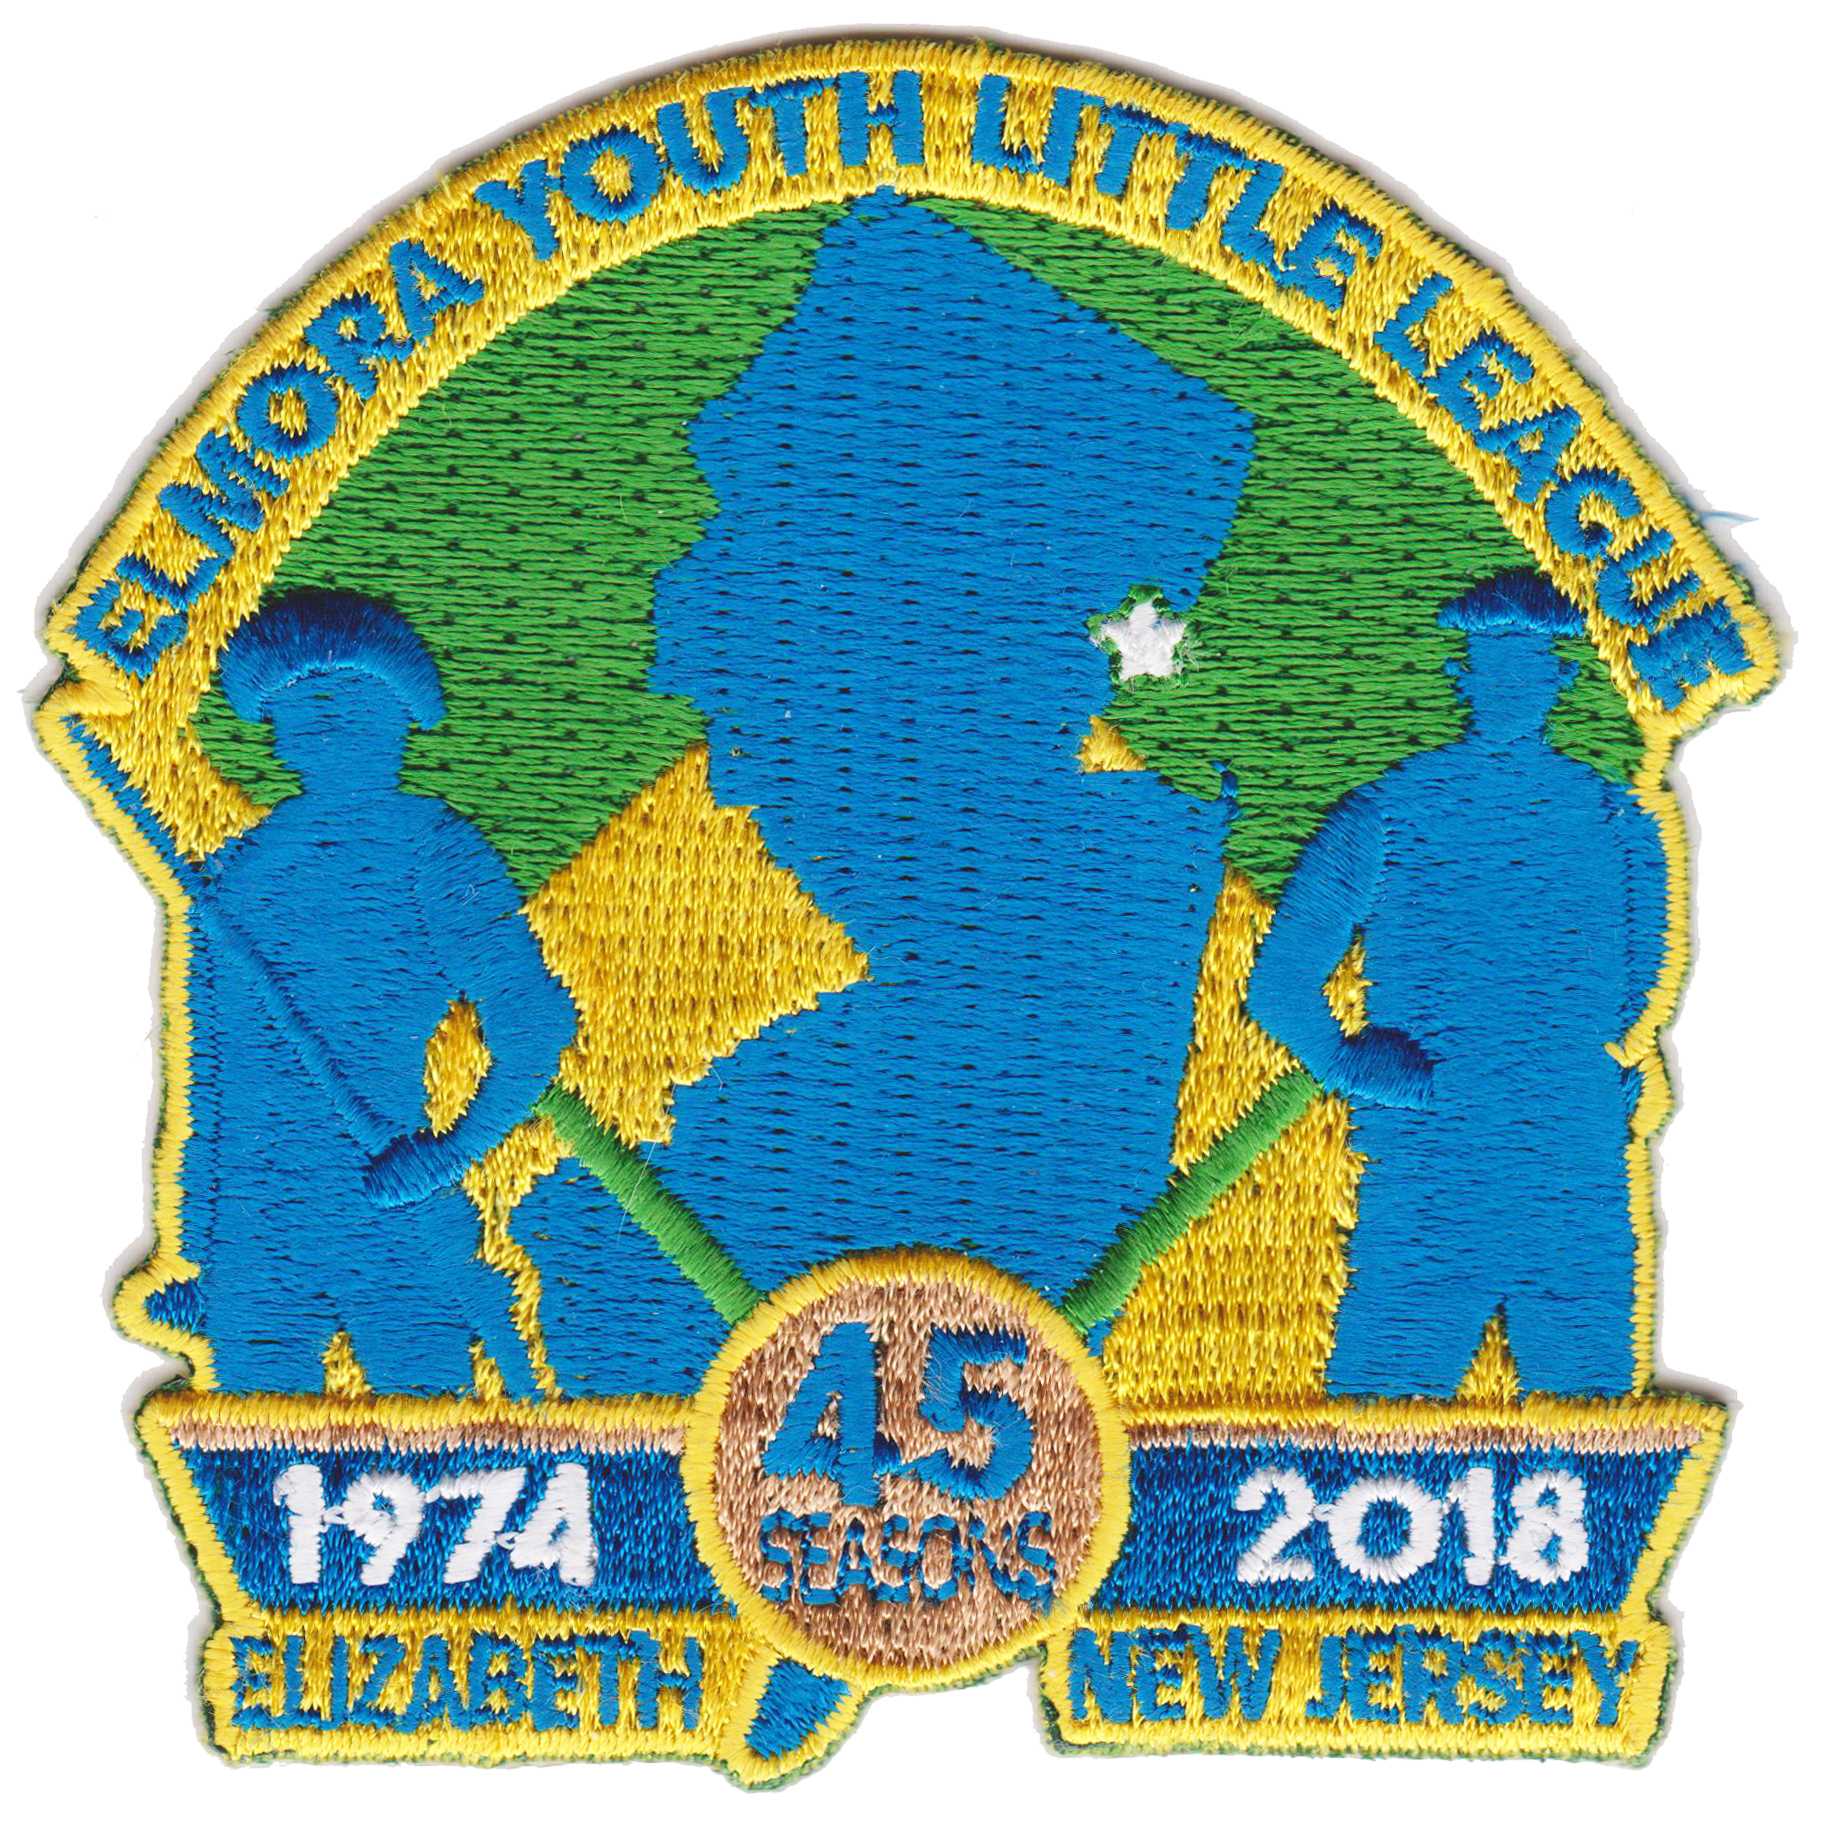 EYL_45_Patch_large_Brighter